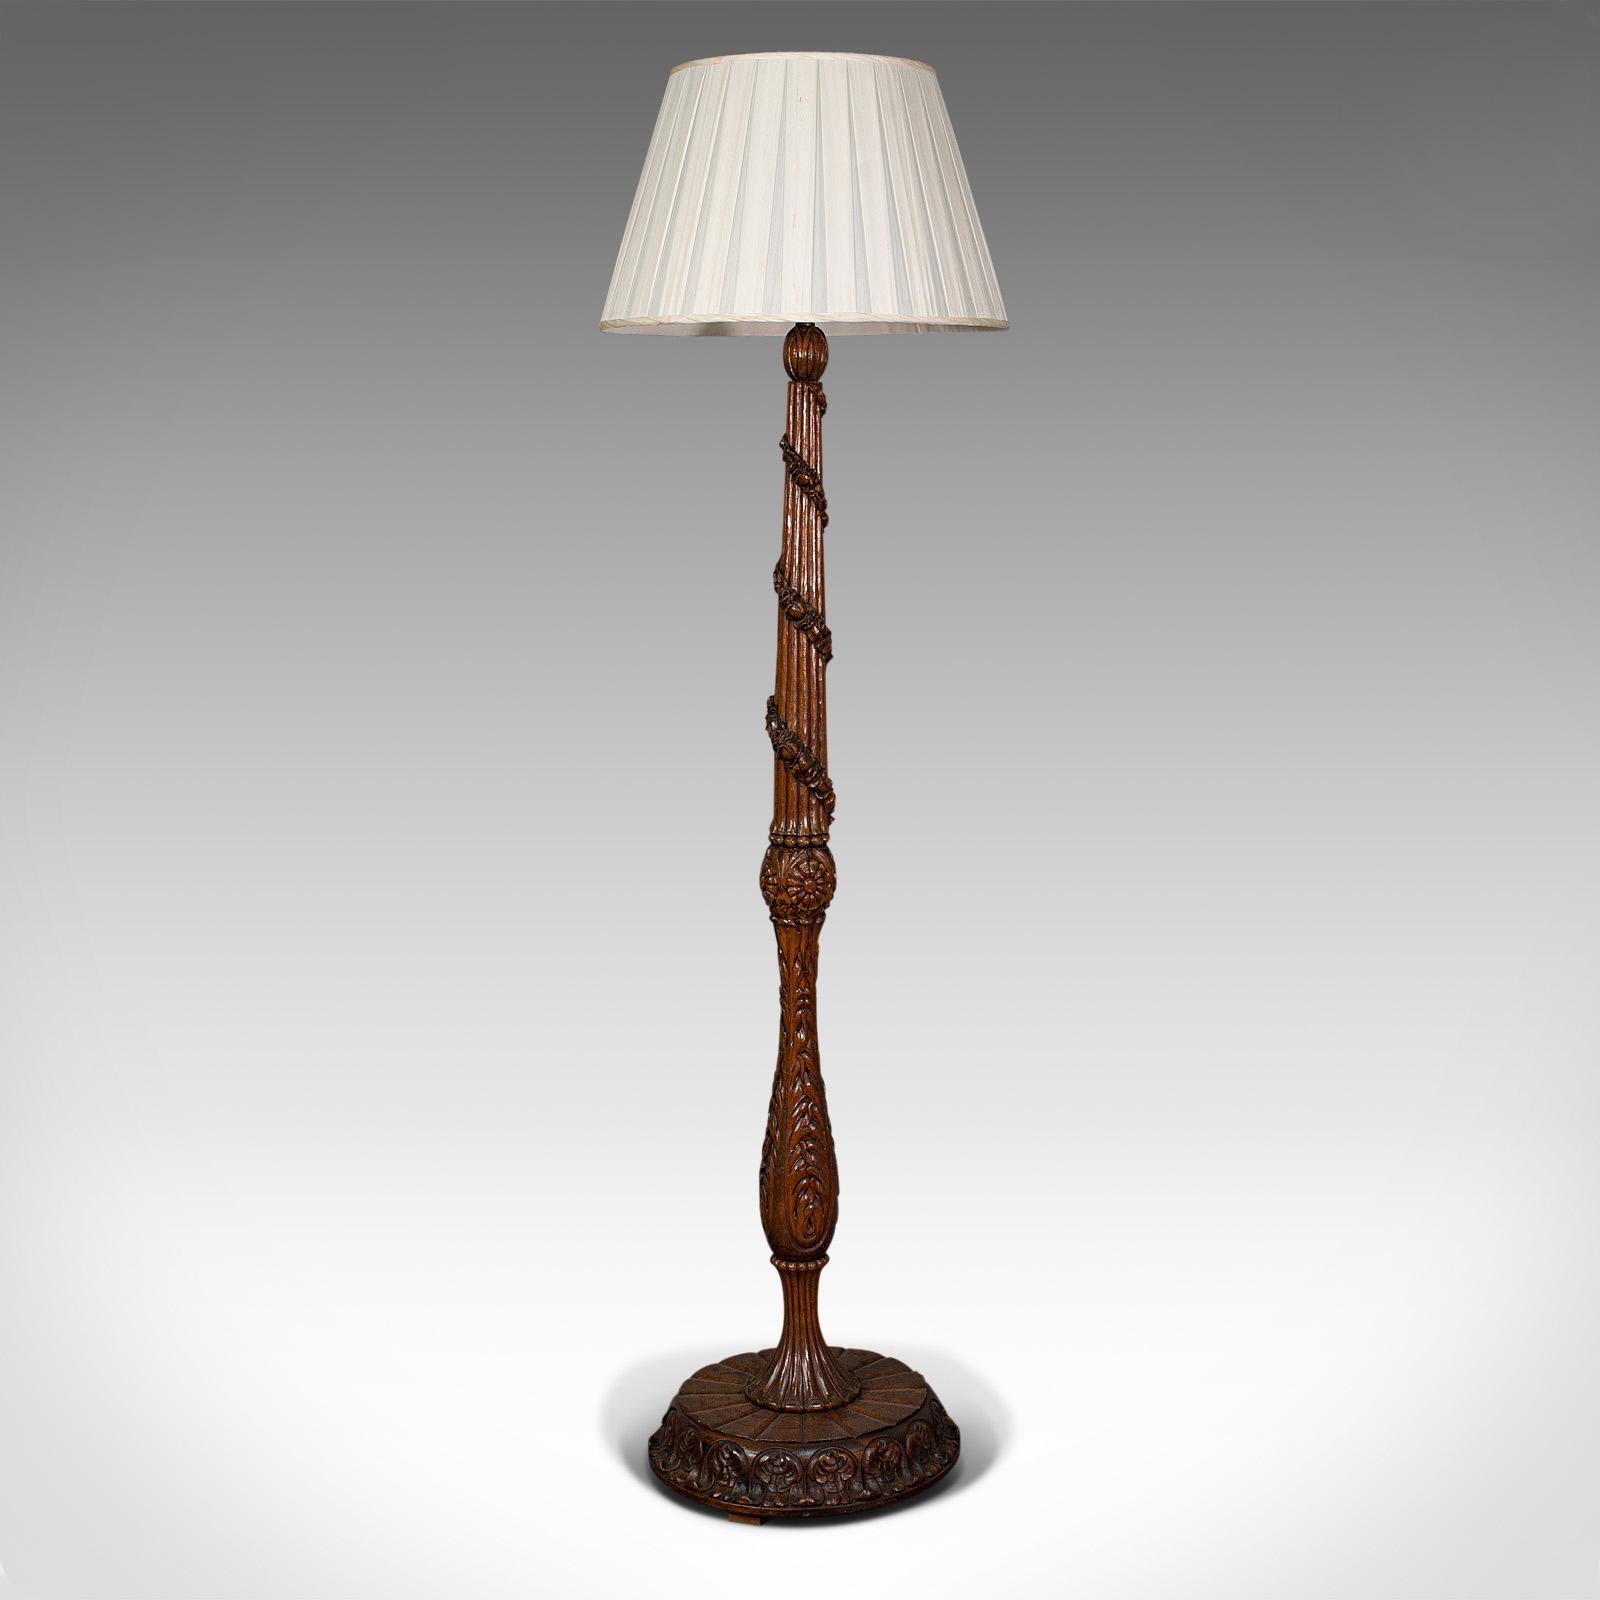 This is an antique standard lamp of Black Forest taste. A Continental, oak lounge or bedpost light, dating to the Edwardian period, circa 1910.

Impressively tall (6'5